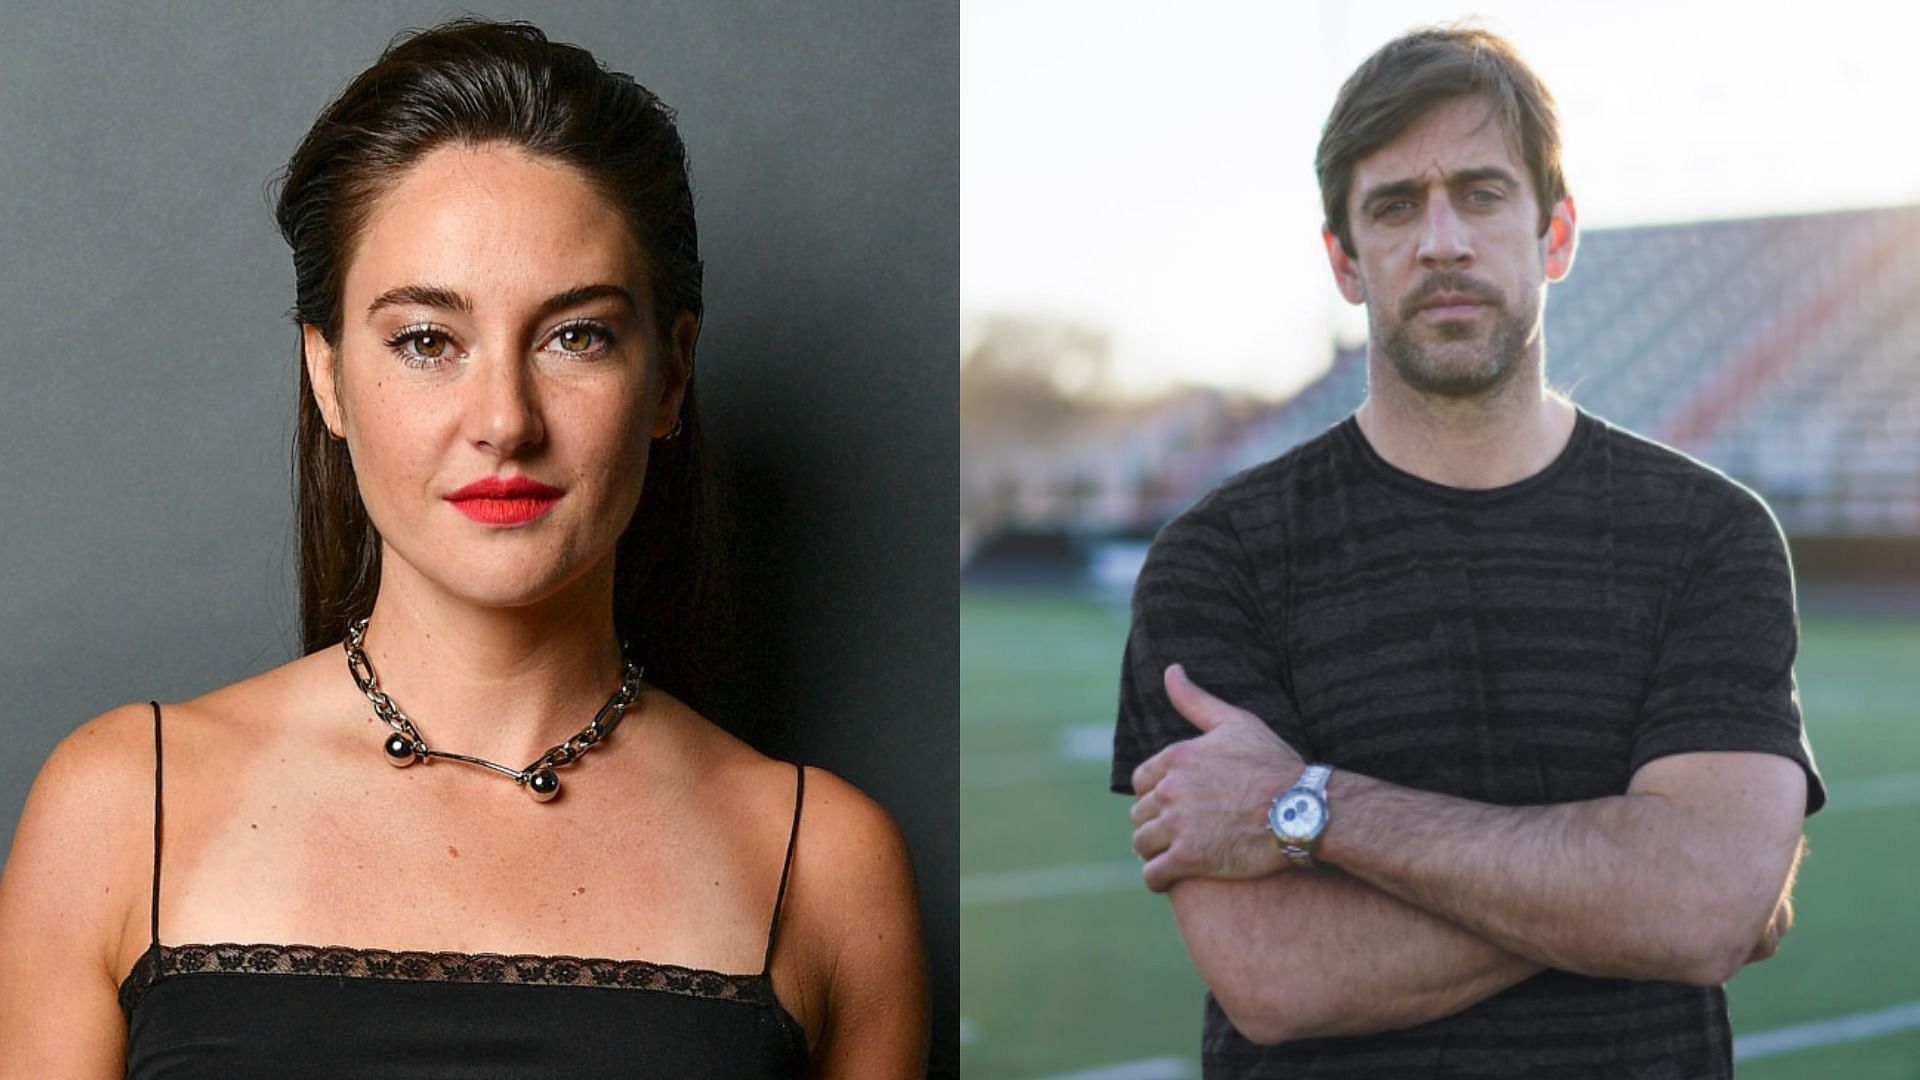 Shailene Woodley and Aaron Rodgers announced their engagement in February 2021 (Image via Getty Images/ George Pimentel; Instagram/ aaronrodgers12)